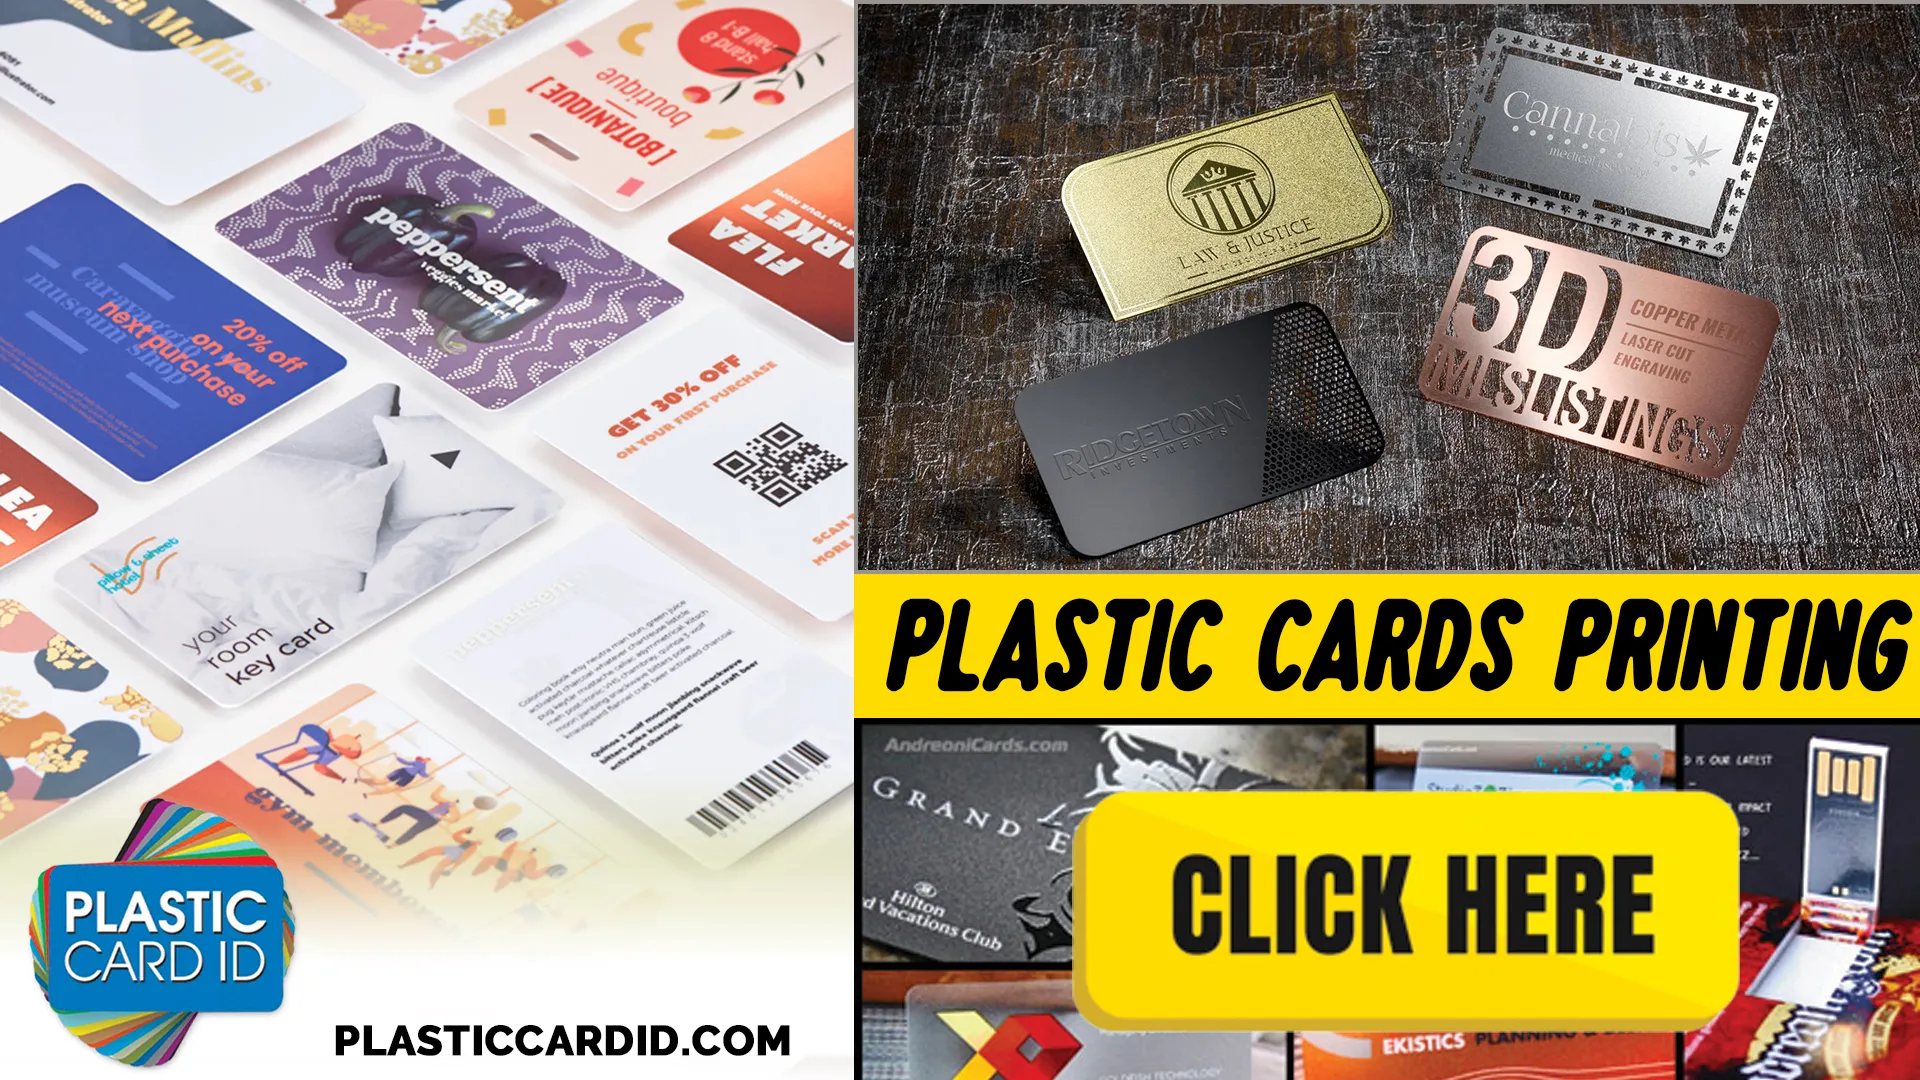 Committed to Sustainable Progress in Plastic Card Printing